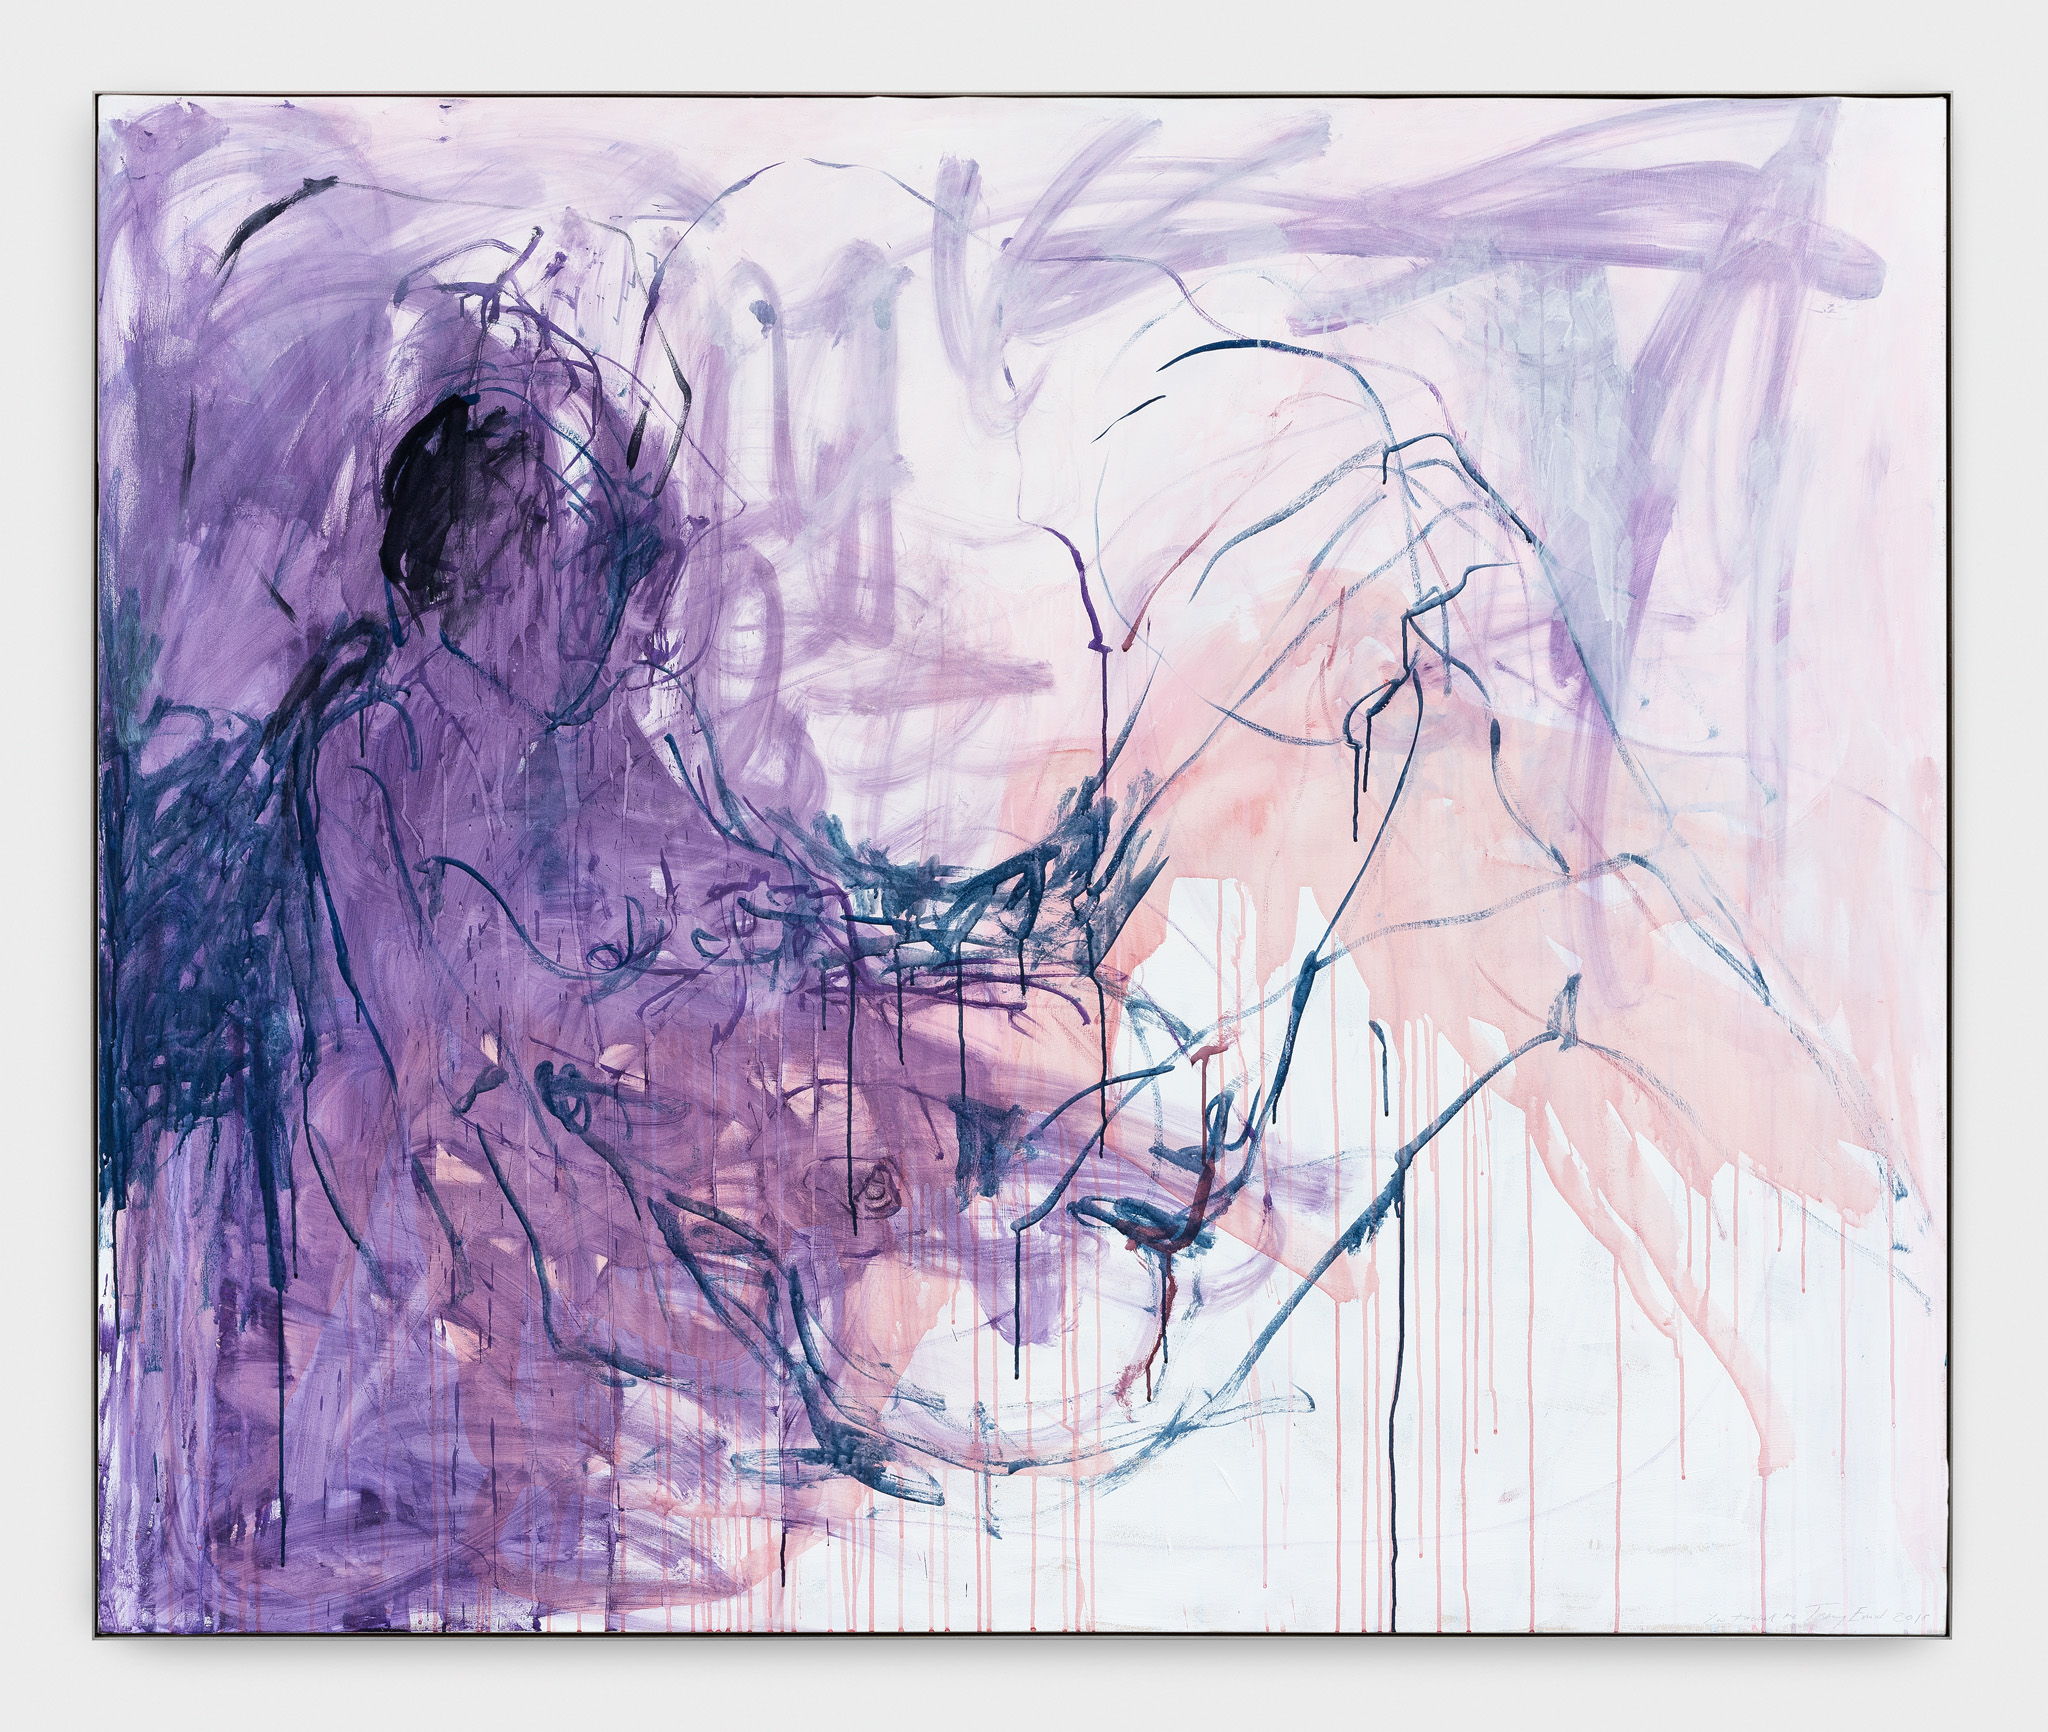 Tracey Emin, You touched me, 2018. Acrylic on canvas, 152,3 x 182,9 x 3,5 cm.
​Photo credit: HV-studio, Brussels. ​Courtesy: the Artist and Xavier Hufkens, Brussels